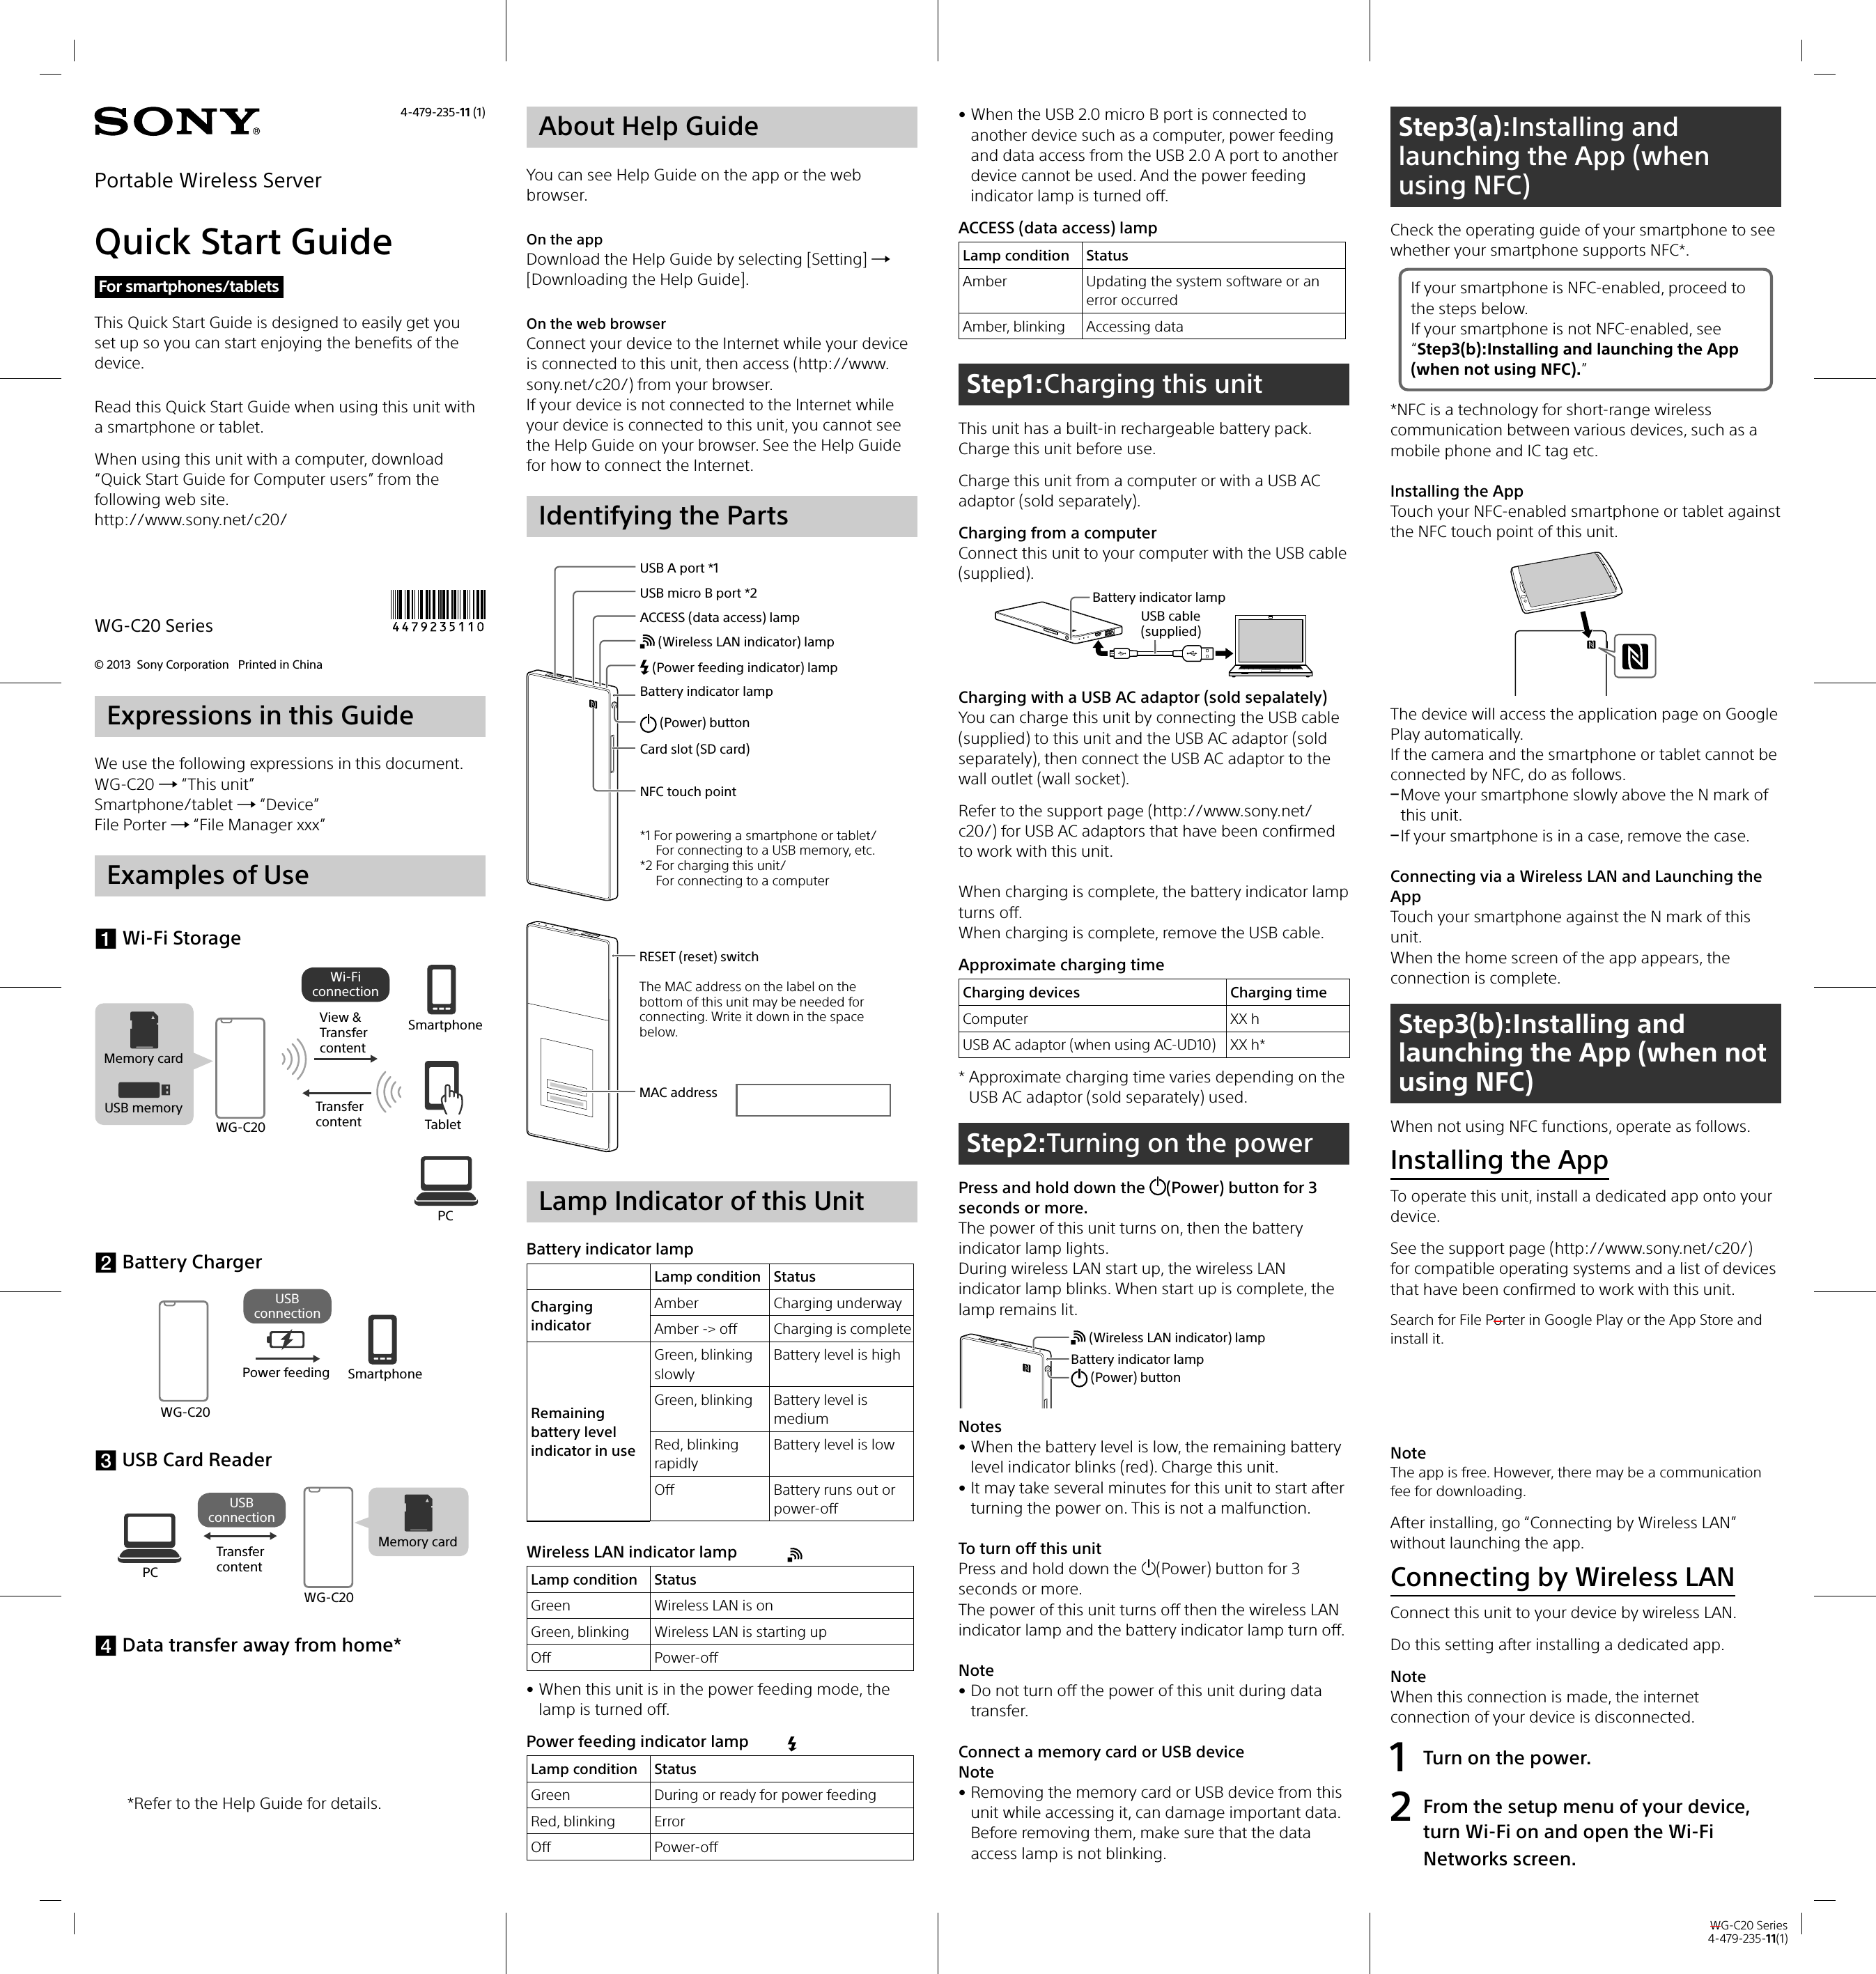 WG-C20 Series4-479-235-11(1)© 2013  Sony Corporation   Printed in China WG-C20 SeriesAbout Help GuideYou can see Help Guide on the app or the web browser.On the appDownload the Help Guide by selecting [Setting]  [Downloading the Help Guide].On the web browser Connect your device to the Internet while your device is connected to this unit, then access (http://www.sony.net/c20/) from your browser.If your device is not connected to the Internet while your device is connected to this unit, you cannot see the Help Guide on your browser. See the Help Guide for how to connect the Internet.Identifying the PartsUSB A port *1USB micro B port *2ACCESS (data access) lamp (Wireless LAN indicator) lamp (Power feeding indicator) lampBattery indicator lamp (Power) buttonCard slot (SD card)NFC touch point*1 For powering a smartphone or tablet/ For connecting to a USB memory, etc.*2 For charging this unit/For connecting to a computerRESET (reset) switchMAC addressThe MAC address on the label on the bottom of this unit may be needed for connecting. Write it down in the space below.Lamp Indicator of this UnitBattery indicator lampLamp condition StatusCharging indicatorAmber Charging underwayAmber -&gt; off Charging is completeRemaining battery level indicator in useGreen, blinking slowlyBattery level is highGreen, blinking Battery level is mediumRed, blinking rapidlyBattery level is lowOff Battery runs out or power-offWireless LAN indicator lamp Lamp condition StatusGreen Wireless LAN is onGreen, blinking Wireless LAN is starting upOff Power-off • When this unit is in the power feeding mode, the lamp is turned off.Power feeding indicator lamp Lamp condition StatusGreen During or ready for power feedingRed, blinking ErrorOff Power-offExpressions in this GuideWe use the following expressions in this document.WG-C20  “This unit”Smartphone/tablet  “Device”File Porter  “File Manager xxx”Examples of Use Wi-Fi StorageUSB memoryMemory cardWG-C20View &amp; Transfer contentTransfer contentSmartphoneTabletPCWi-Fi connection Battery ChargerWG-C20Power feeding SmartphoneUSB connection USB Card ReaderMemory cardWG-C20Transfer contentPCUSB connection Data transfer away from home**Refer to the Help Guide for details. • When the USB 2.0 micro B port is connected to another device such as a computer, power feeding and data access from the USB 2.0 A port to another device cannot be used. And the power feeding indicator lamp is turned off.ACCESS (data access) lampLamp condition StatusAmber Updating the system software or an error occurredAmber, blinking Accessing dataStep1:Charging this unitThis unit has a built-in rechargeable battery pack.Charge this unit before use.Charge this unit from a computer or with a USB AC adaptor (sold separately).Charging from a computerConnect this unit to your computer with the USB cable (supplied).Battery indicator lampUSB cable (supplied)Charging with a USB AC adaptor (sold sepalately)You can charge this unit by connecting the USB cable (supplied) to this unit and the USB AC adaptor (sold separately), then connect the USB AC adaptor to the wall outlet (wall socket).Refer to the support page (http://www.sony.net/c20/) for USB AC adaptors that have been confirmed to work with this unit.When charging is complete, the battery indicator lamp turns off.When charging is complete, remove the USB cable.Approximate charging timeCharging devices  Charging timeComputer XX hUSB AC adaptor (when using AC-UD10) XX h**  Approximate charging time varies depending on the USB AC adaptor (sold separately) used. Step2:Turning on the powerPress and hold down the  (Power) button for 3 seconds or more.The power of this unit turns on, then the battery indicator lamp lights.During wireless LAN start up, the wireless LAN indicator lamp blinks. When start up is complete, the lamp remains lit.Battery indicator lamp (Power) button (Wireless LAN indicator) lampNotes • When the battery level is low, the remaining battery level indicator blinks (red). Charge this unit. • It may take several minutes for this unit to start after turning the power on. This is not a malfunction. To turn off this unitPress and hold down the (Power) button for 3 seconds or more.The power of this unit turns off then the wireless LAN indicator lamp and the battery indicator lamp turn off.Note • Do not turn off the power of this unit during data transfer.Connect a memory card or USB deviceNote • Removing the memory card or USB device from this unit while accessing it, can damage important data. Before removing them, make sure that the data access lamp is not blinking.Step3(a):Installing and launching the App (when using NFC)Check the operating guide of your smartphone to see whether your smartphone supports NFC*.If your smartphone is NFC-enabled, proceed to the steps below.If your smartphone is not NFC-enabled, see “Step3(b):Installing and launching the App (when not using NFC).”*NFC is a technology for short-range wireless communication between various devices, such as a mobile phone and IC tag etc.Installing the AppTouch your NFC-enabled smartphone or tablet against the NFC touch point of this unit.The device will access the application page on Google Play automatically.If the camera and the smartphone or tablet cannot be connected by NFC, do as follows. Move your smartphone slowly above the N mark of this unit. If your smartphone is in a case, remove the case.Connecting via a Wireless LAN and Launching the AppTouch your smartphone against the N mark of this unit.When the home screen of the app appears, the connection is complete.Step3(b):Installing and launching the App (when not using NFC)When not using NFC functions, operate as follows.Installing the AppTo operate this unit, install a dedicated app onto your device.See the support page (http://www.sony.net/c20/) for compatible operating systems and a list of devices that have been confirmed to work with this unit.Search for File Porter in Google Play or the App Store and install it.NoteThe app is free. However, there may be a communication fee for downloading.After installing, go “Connecting by Wireless LAN” without launching the app.Connecting by Wireless LANConnect this unit to your device by wireless LAN.Do this setting after installing a dedicated app.NoteWhen this connection is made, the internet connection of your device is disconnected. 1  Turn on the power.2  From the setup menu of your device, turn Wi-Fi on and open the Wi-Fi Networks screen.4-479-235-11 (1)Portable Wireless ServerQuick Start GuideRead this Quick Start Guide when using this unit with a smartphone or tablet.When using this unit with a computer, download “Quick Start Guide for Computer users” from the following web site.http://www.sony.net/c20/This Quick Start Guide is designed to easily get you set up so you can start enjoying the benefits of the device.For smartphones/tablets